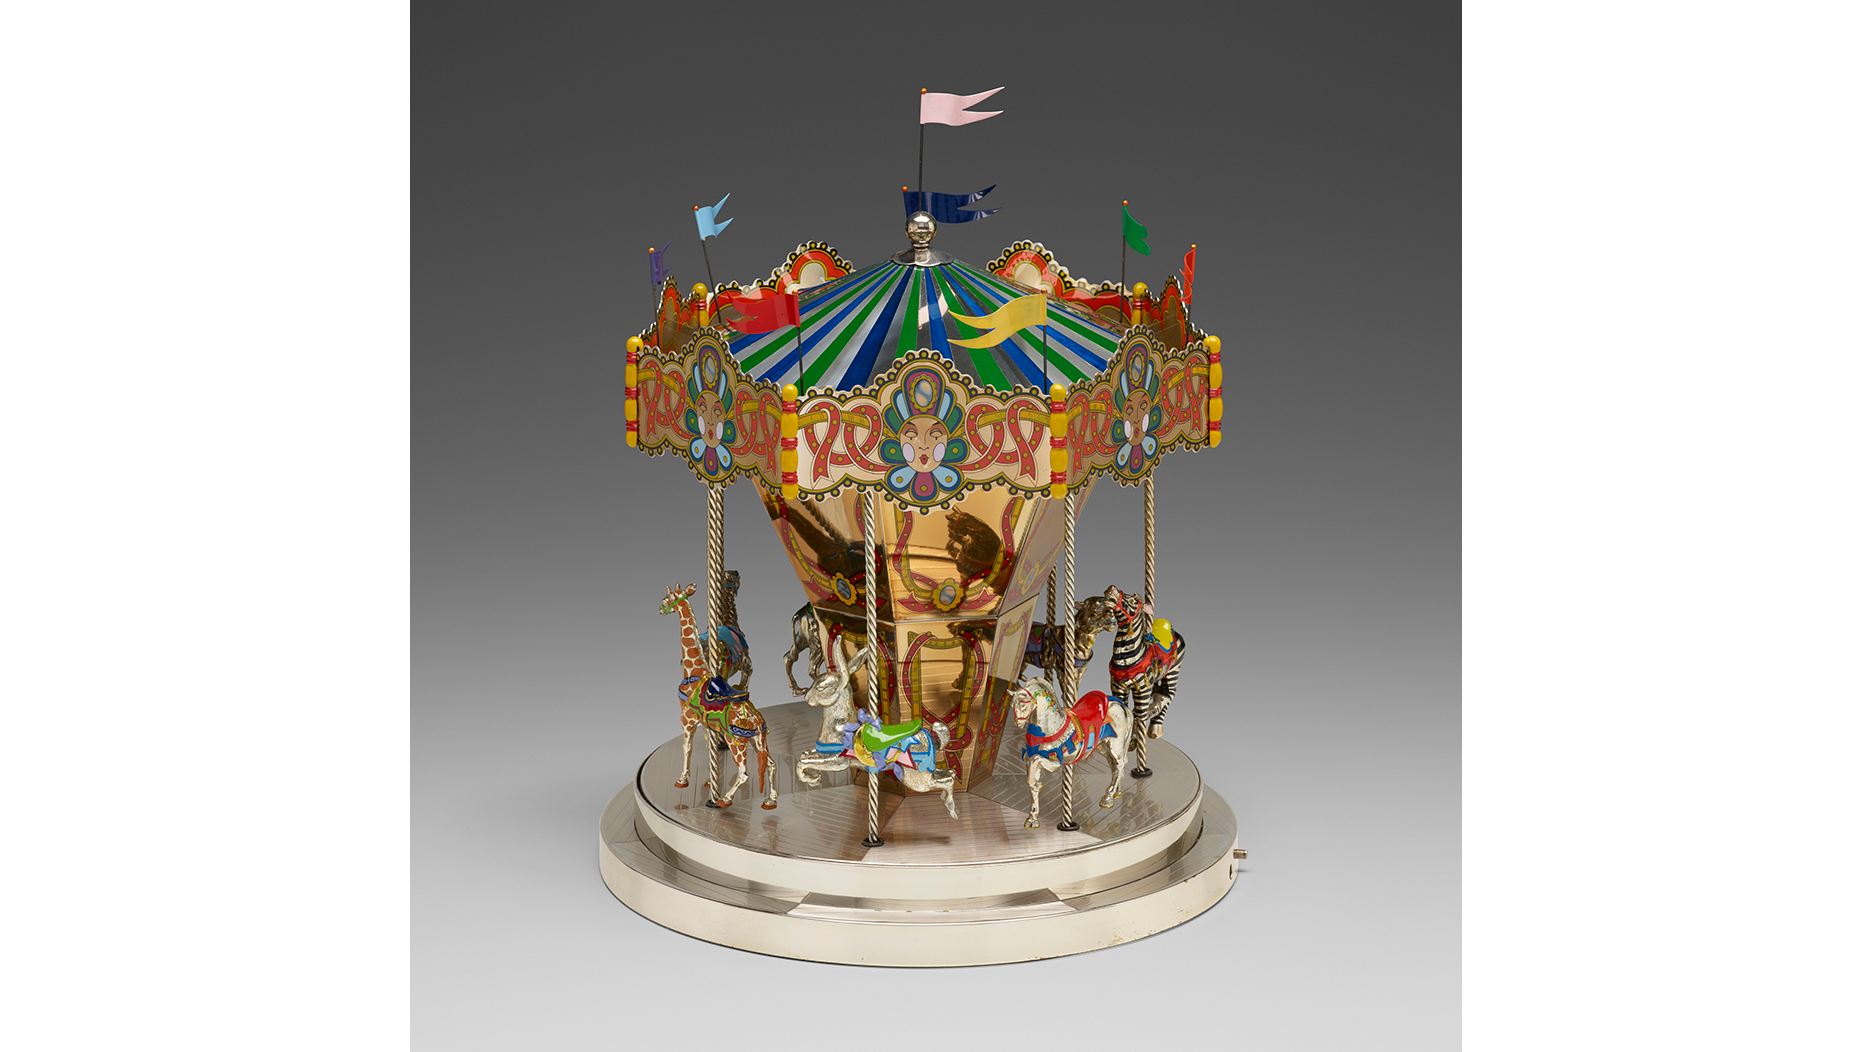 Sold at Auction: Tiffany & Co. Merry Go Round Music Box